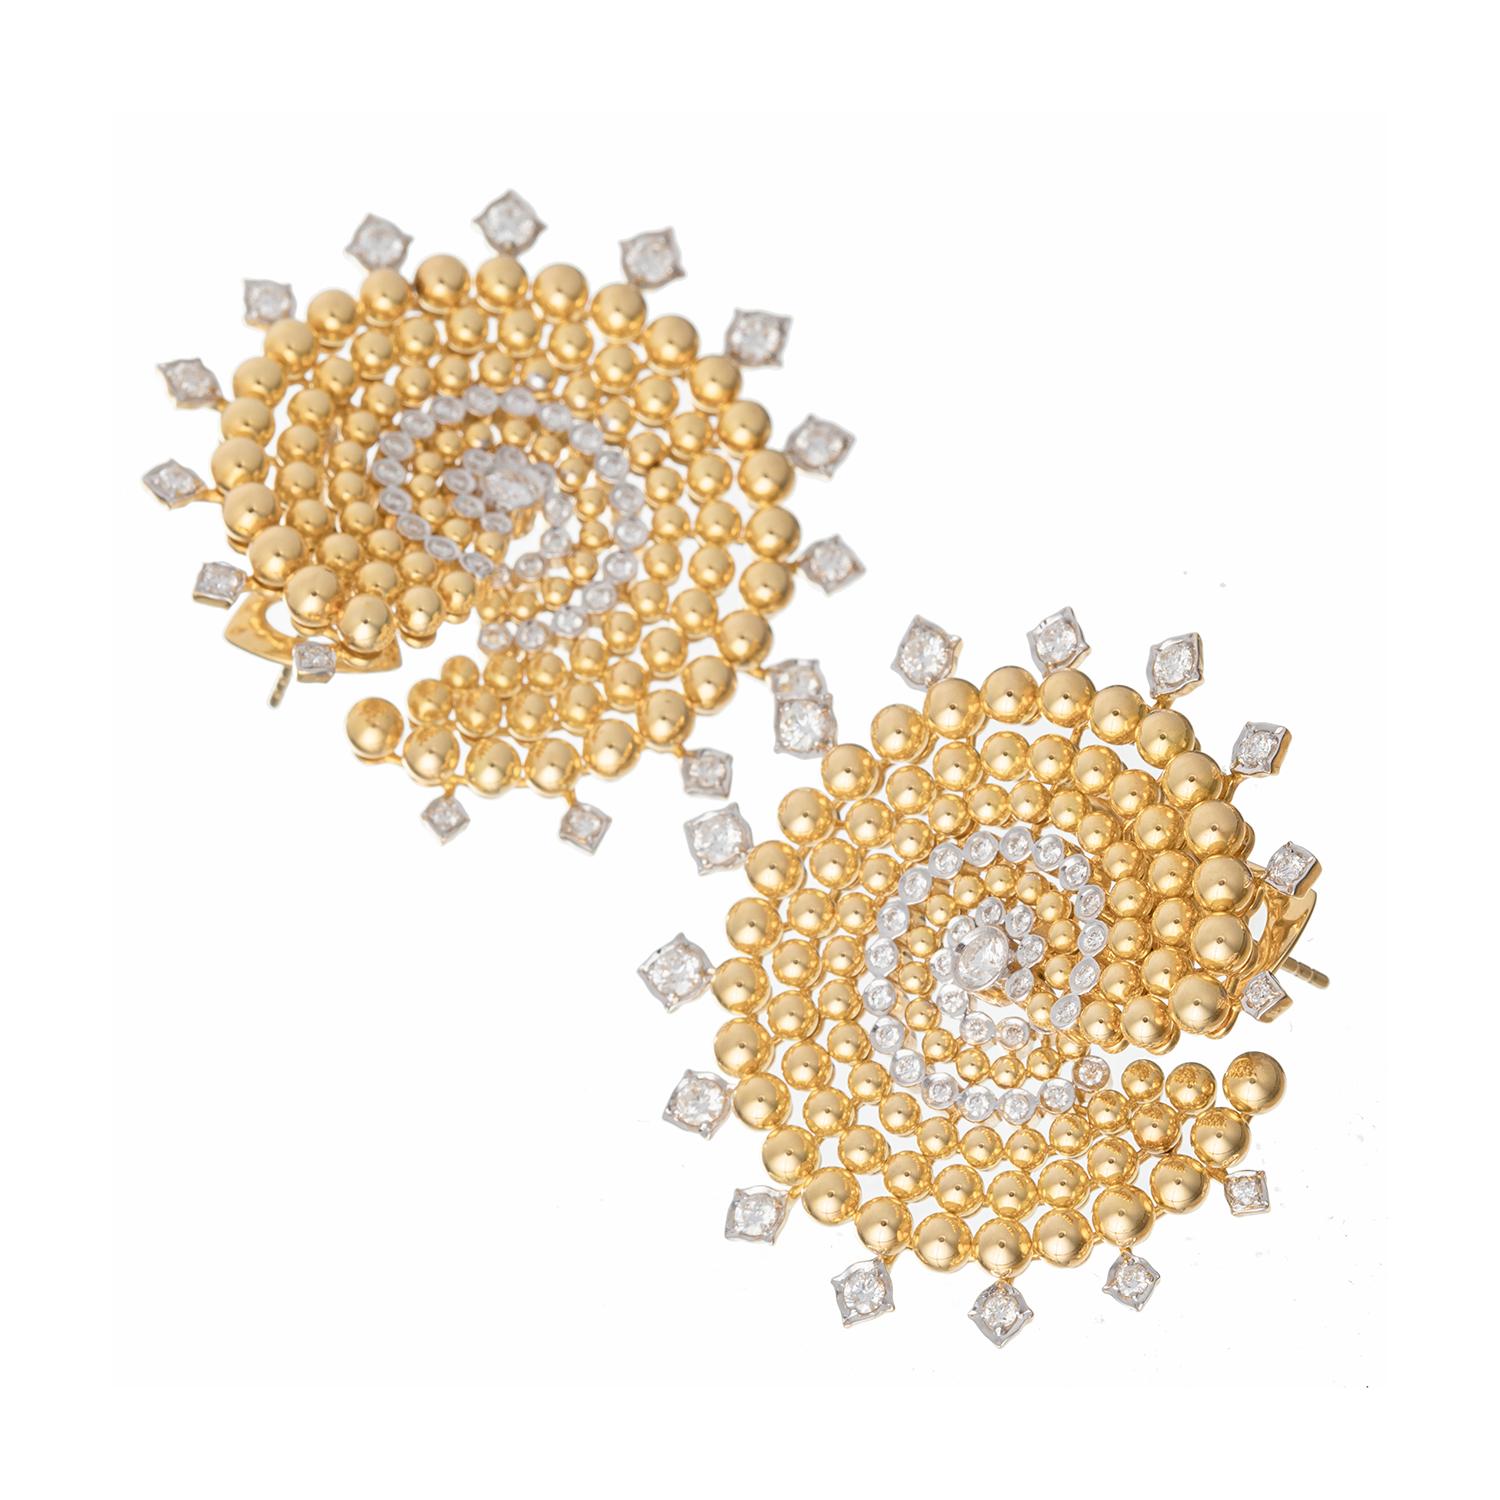 Circular-shaped ear clips, featuring a swirl of graduating polished 18k yellow gold beads with round brilliant-cut diamond accents. Each earring is adorned with fifteen round brilliant cut diamonds on the exterior tips. The centers are each bezel